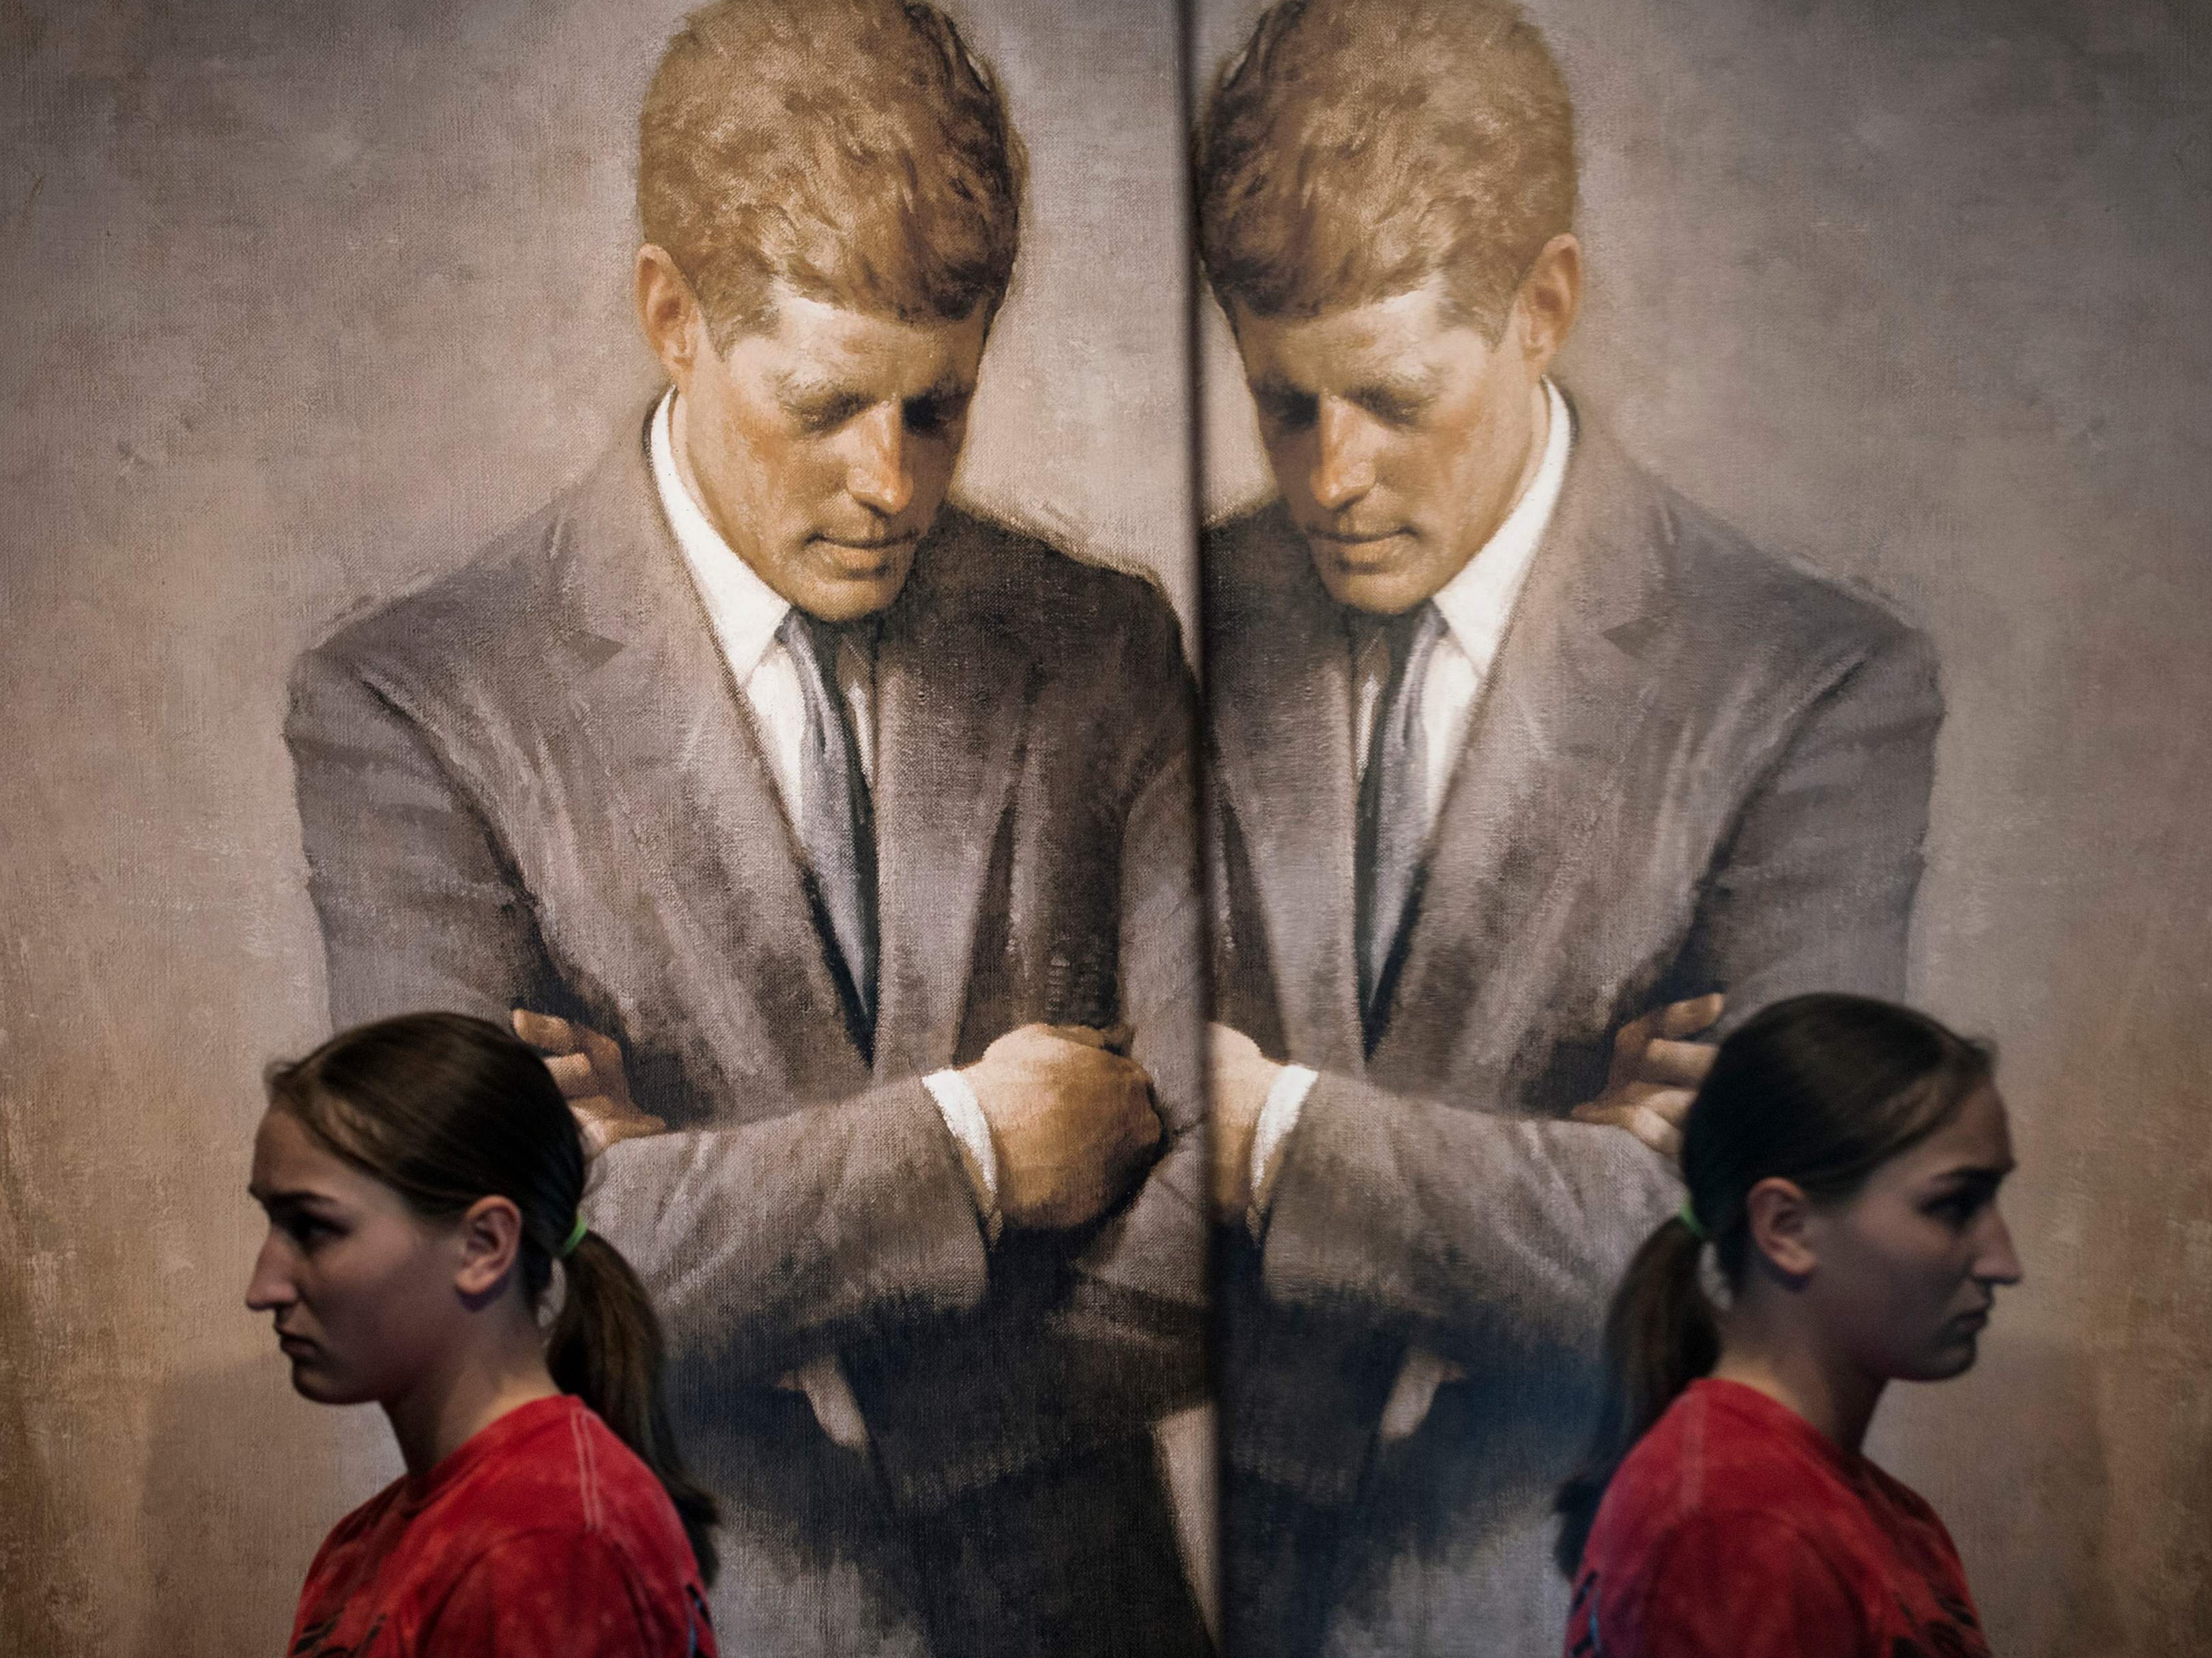 A student walks past the portrait of John F Kenndy that hangs in the White House in 2013